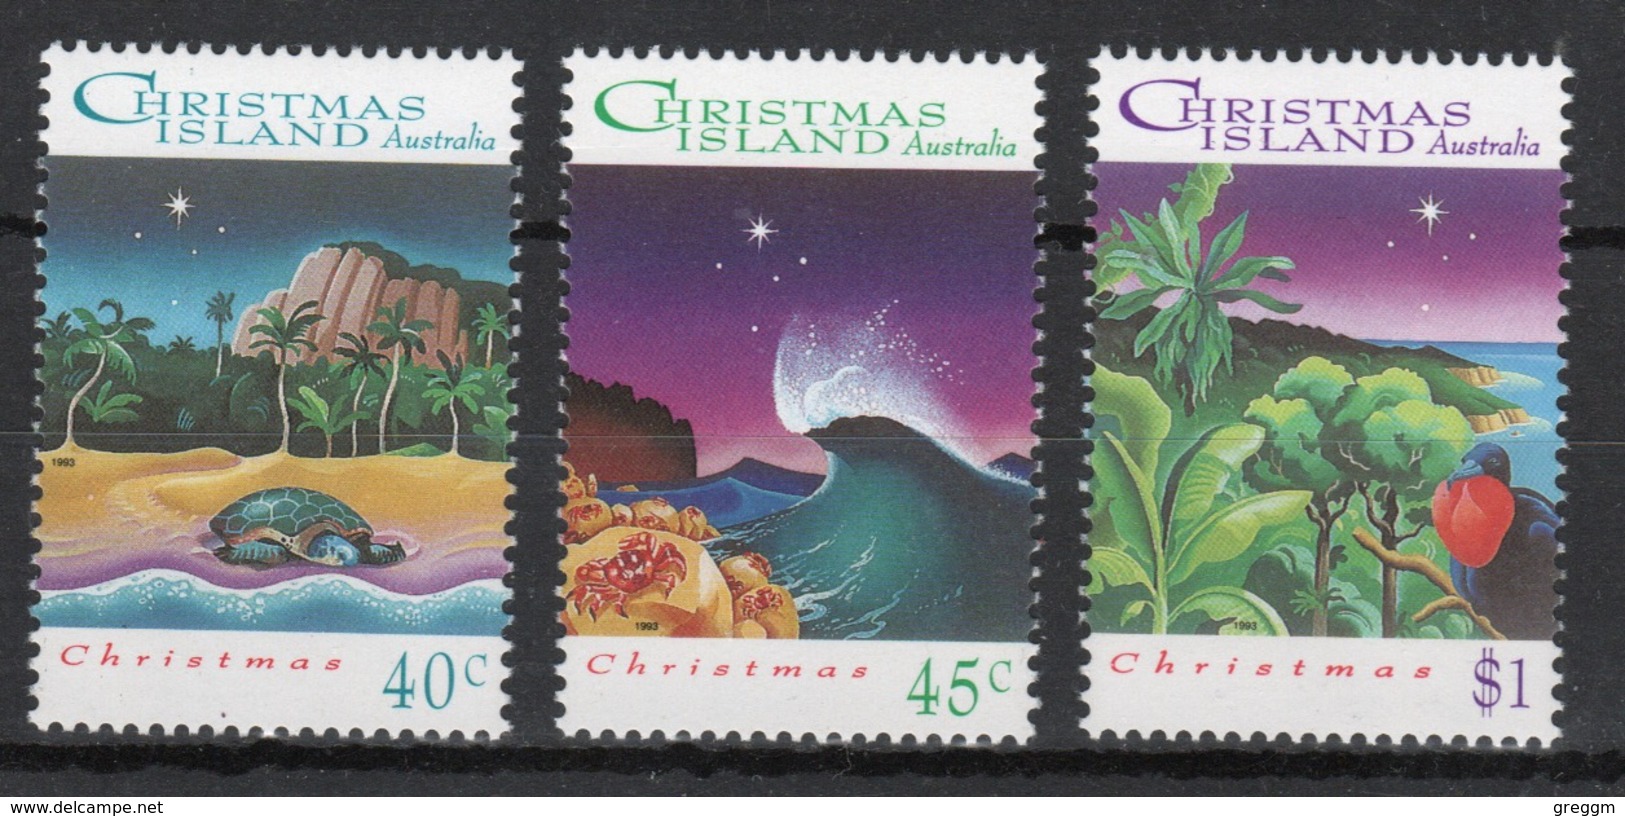 Christmas Island Set Of Stamps To Celebrate Christmas 1993. - Christmas Island